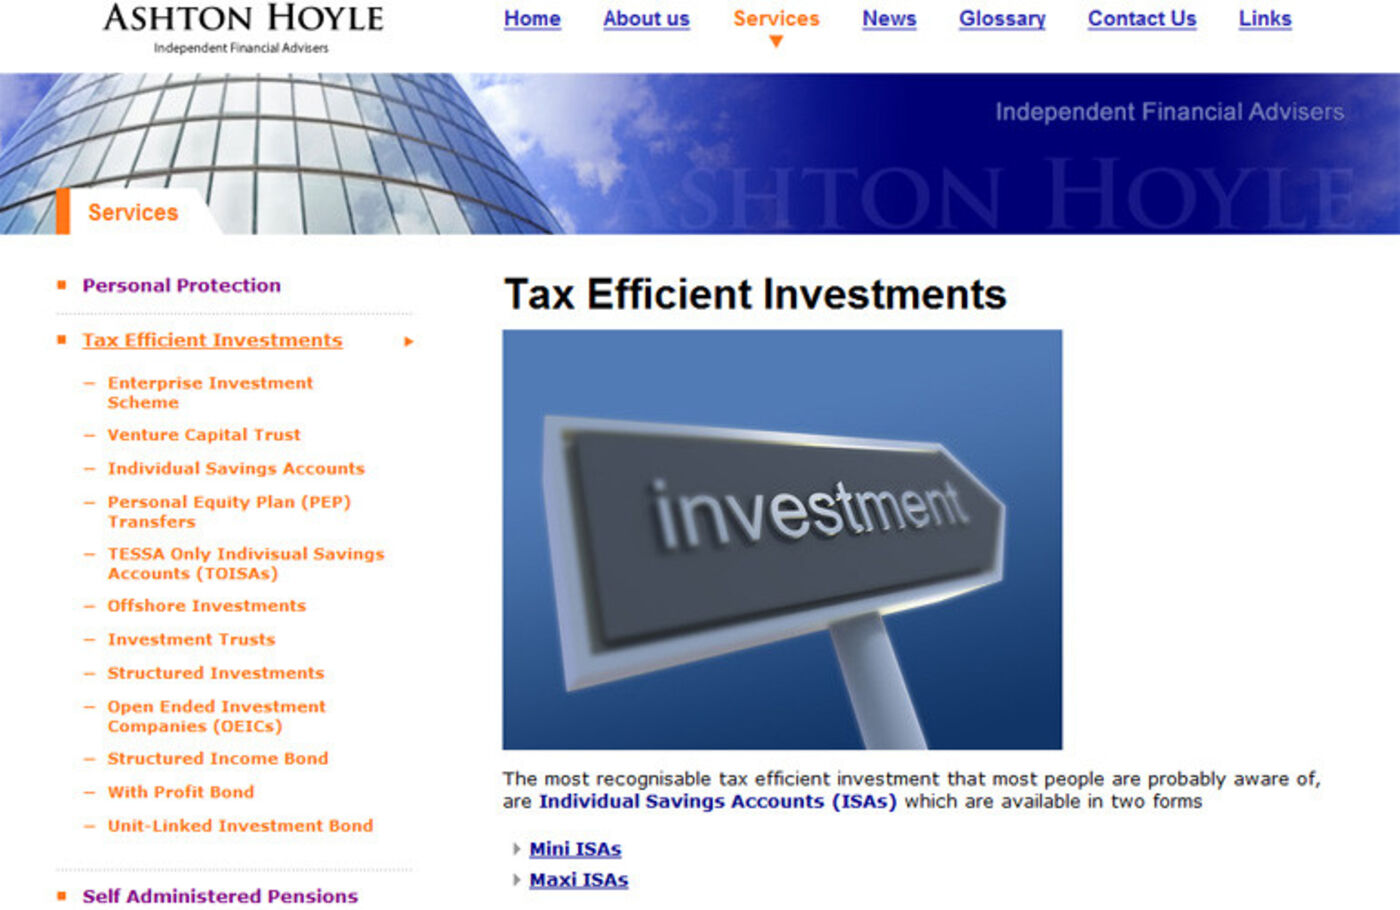 Ashton Hoyle Independent Financial Advisers The efficient investments